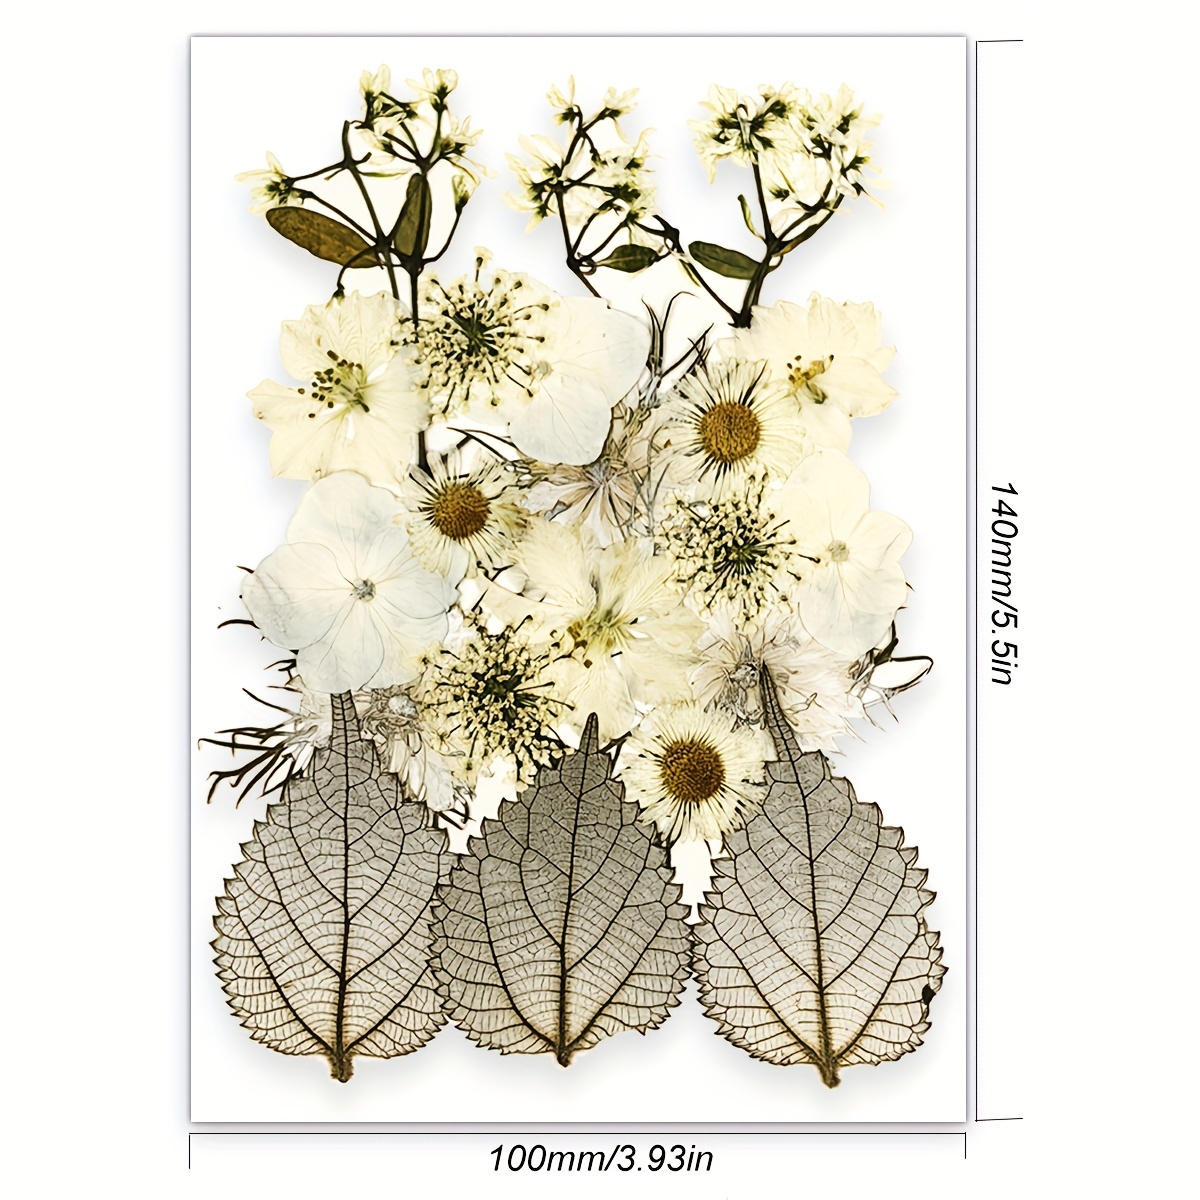 1 Dried Flowers for Resin, Natural Pressed Flowers Leaves for